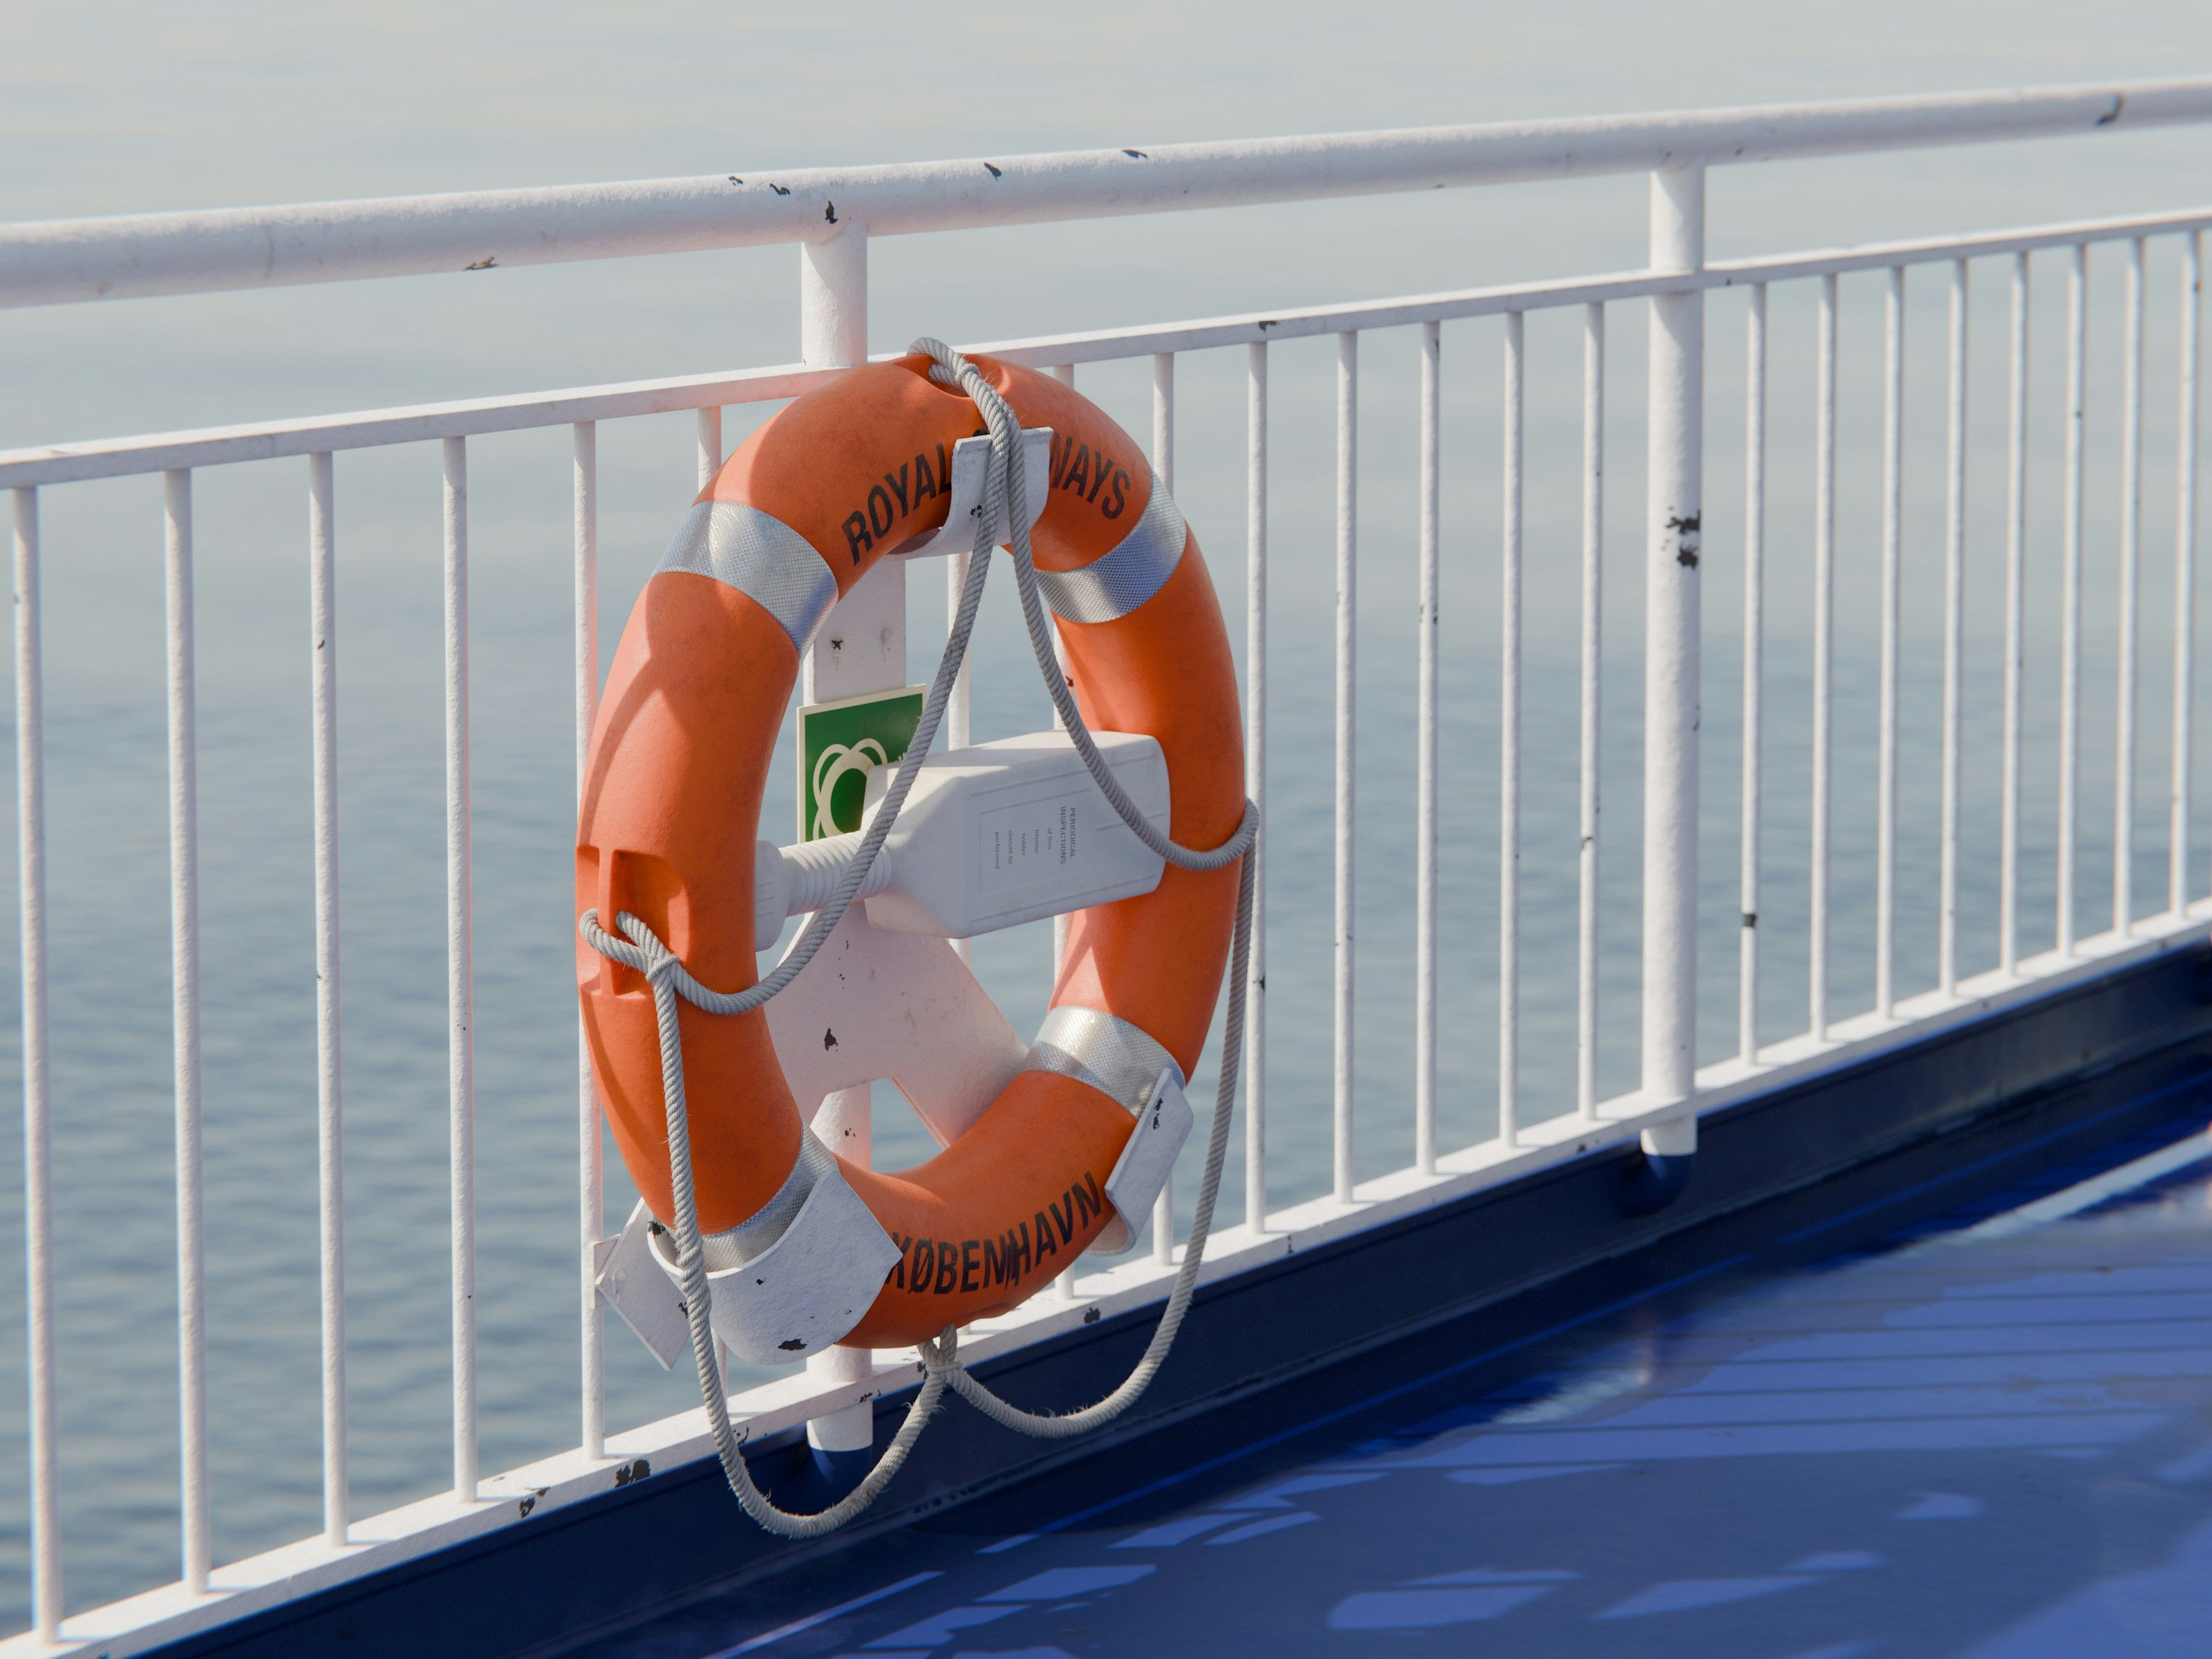 Maritime scene showing a lifebuoy hanging on the railing of a ship